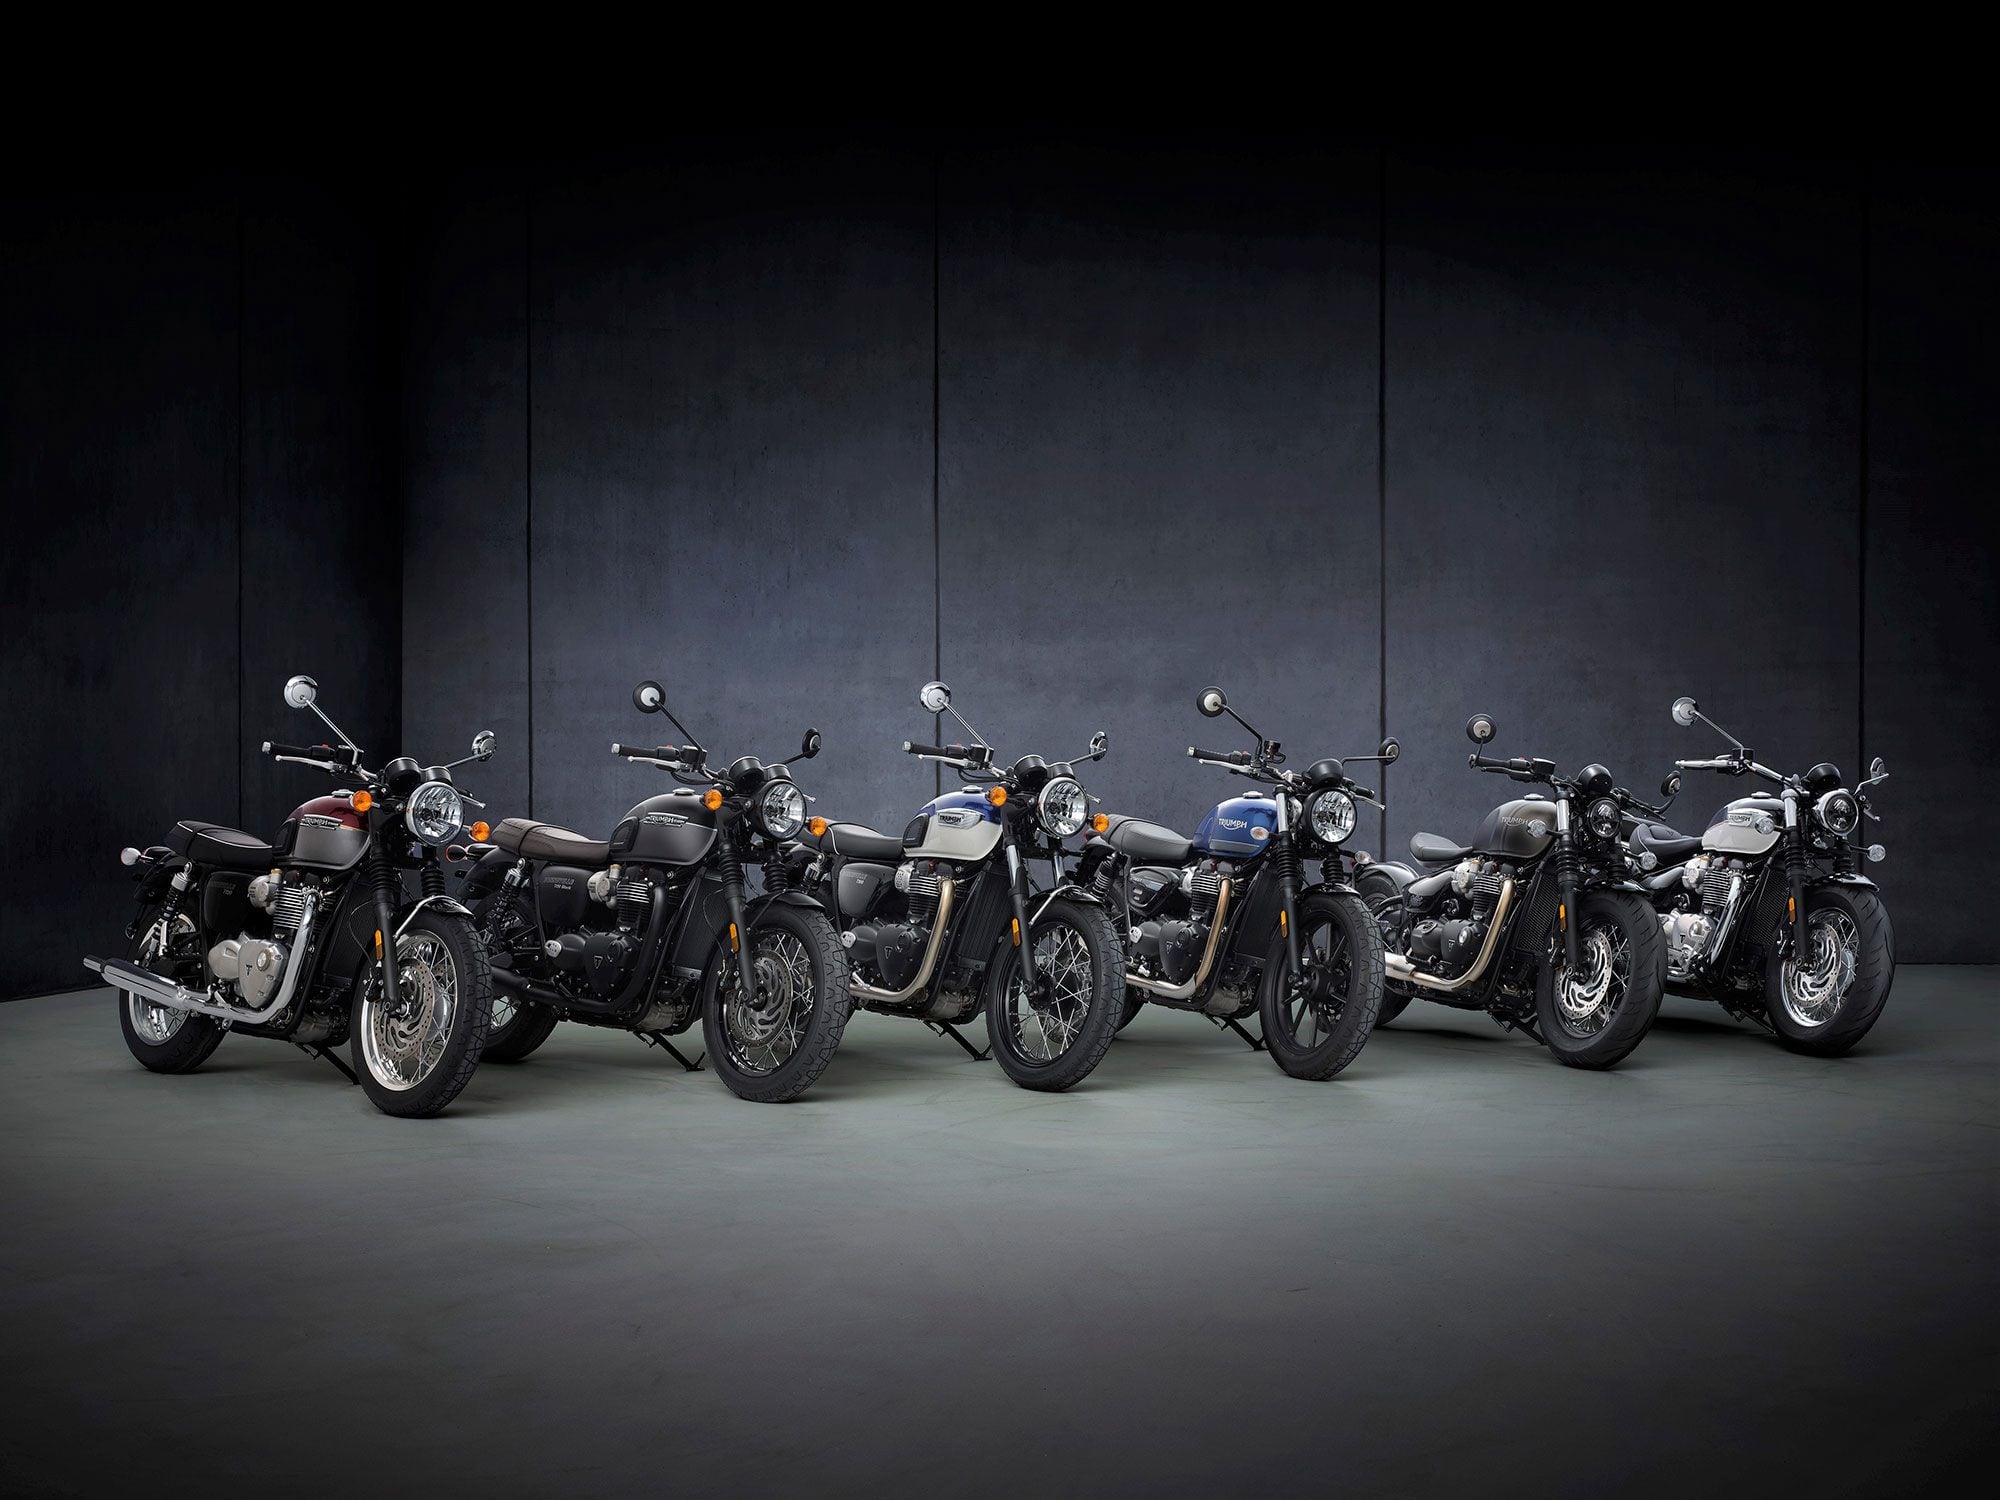 Triumph has upgraded the majority of its Bonneville family. You’re looking at seven models for 2022 so far.